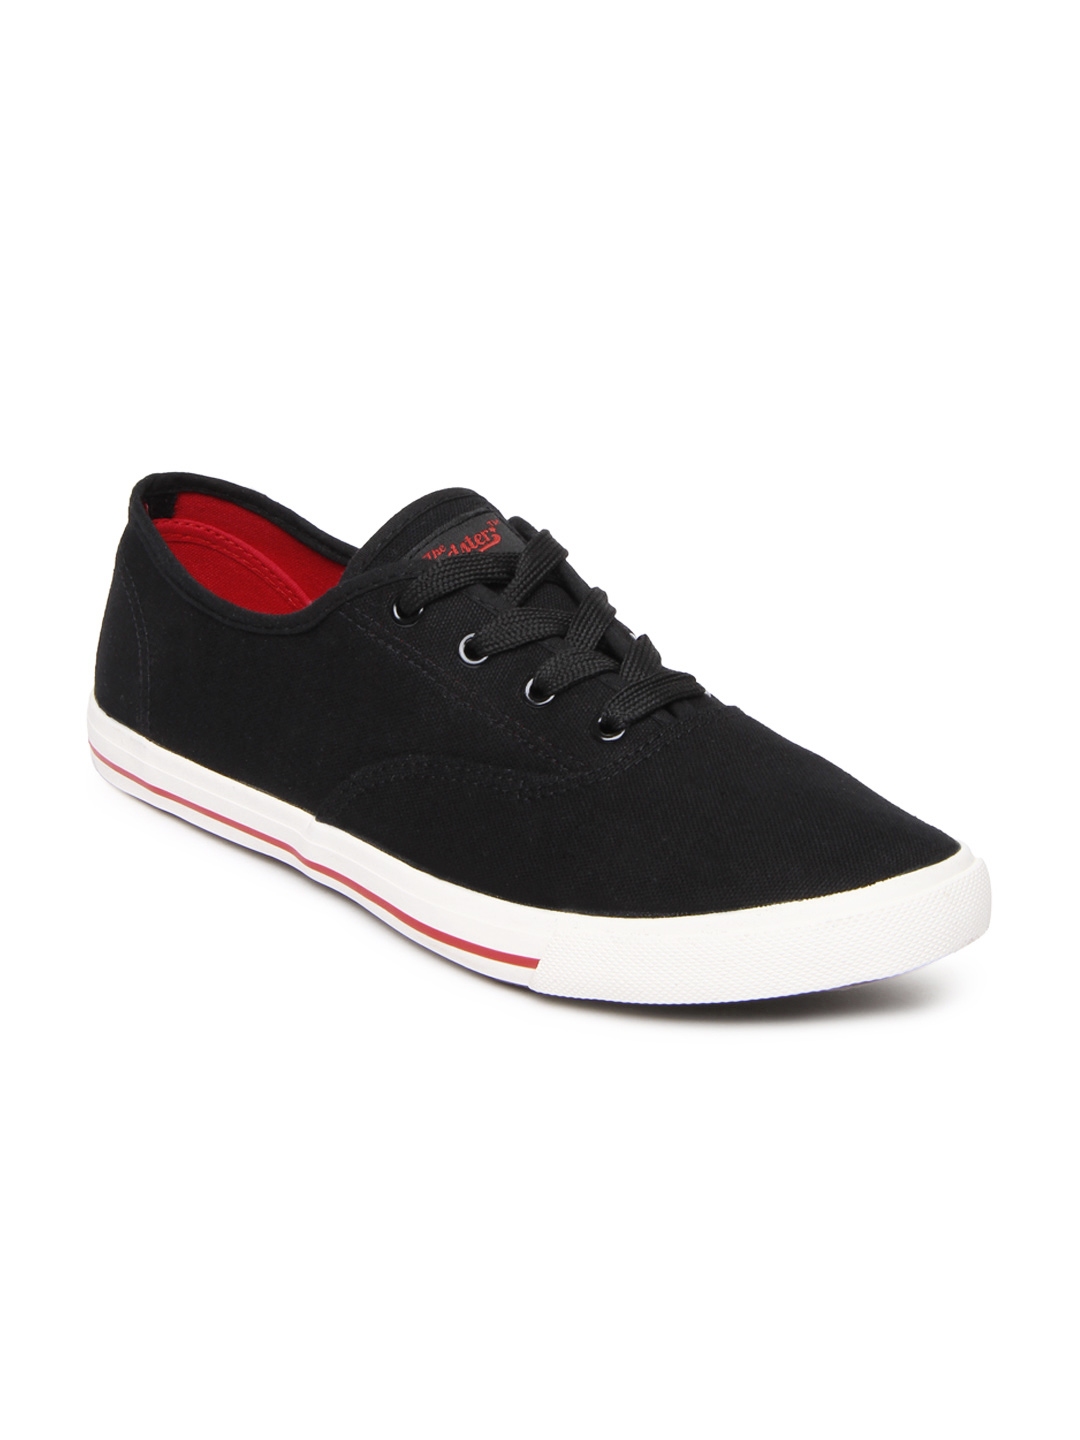 Buy Roadster Men Black Casual Shoes - Casual Shoes for Men 485049 | Myntra